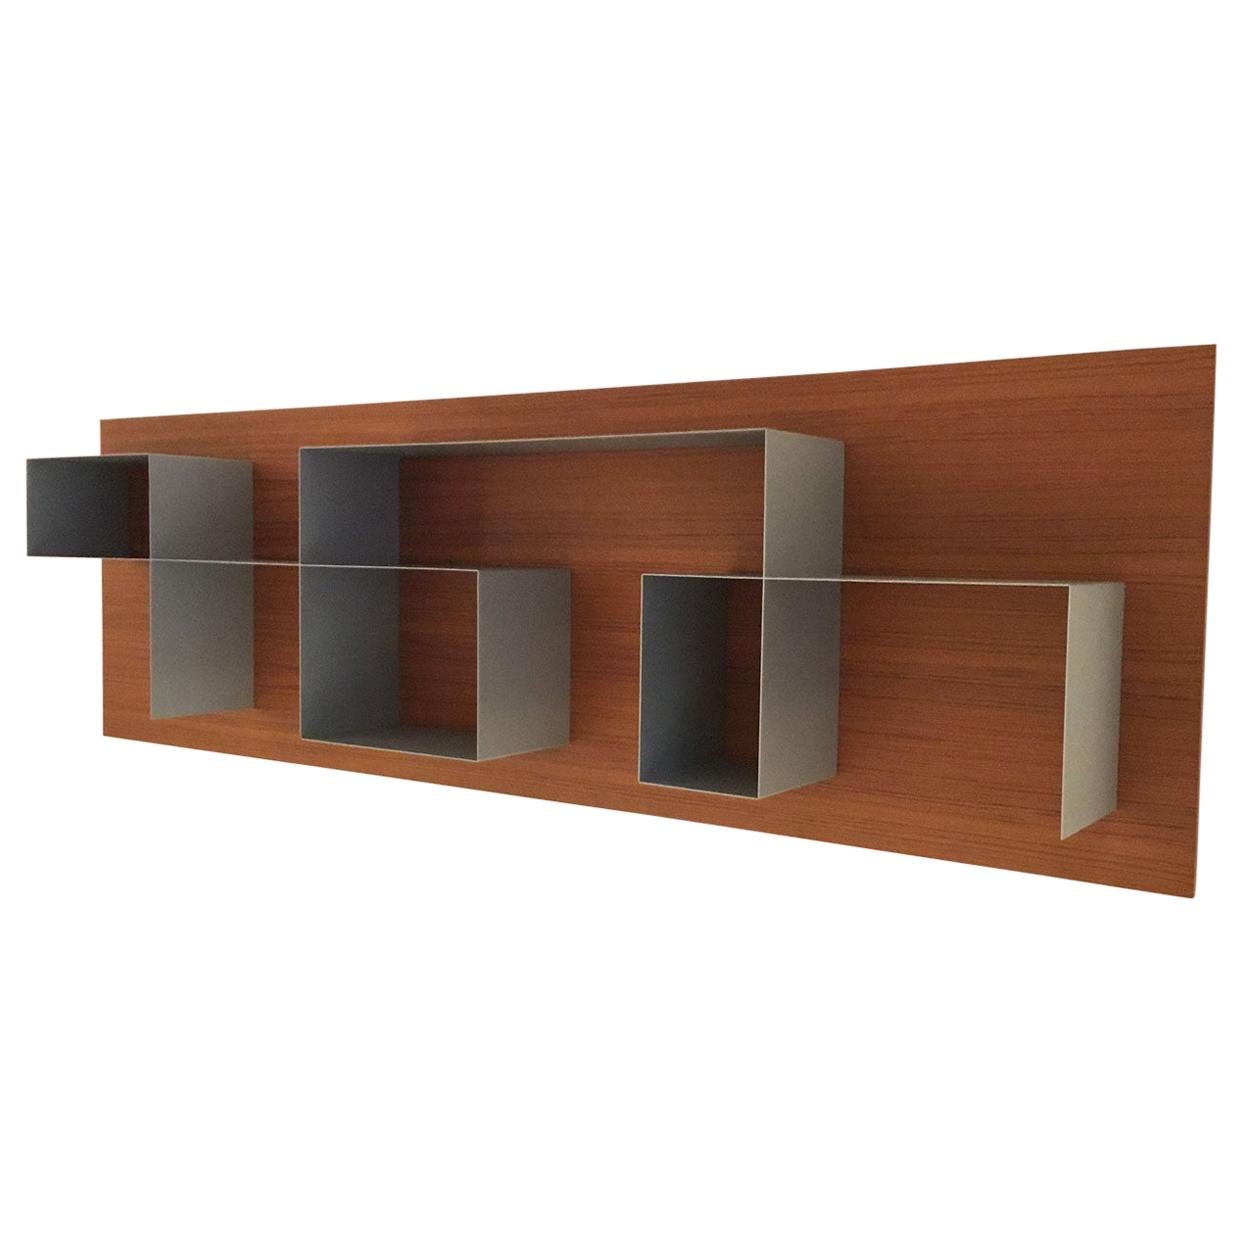 Contemporary Asymmetrical Bookcase with Teak Wall Panel and Aluminum Shelving